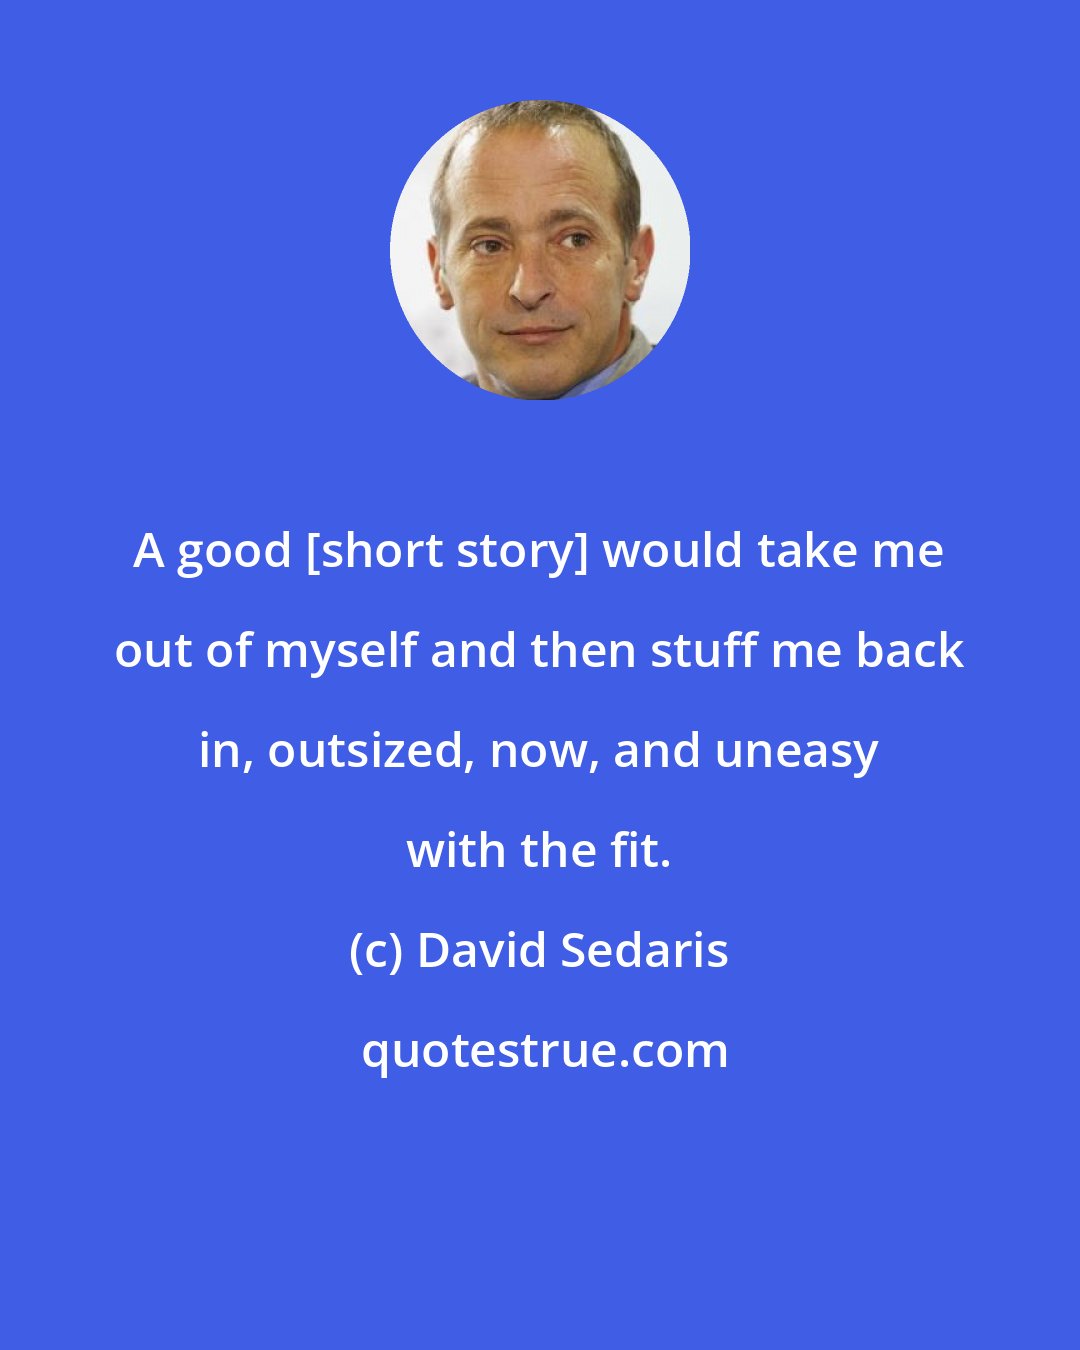 David Sedaris: A good [short story] would take me out of myself and then stuff me back in, outsized, now, and uneasy with the fit.